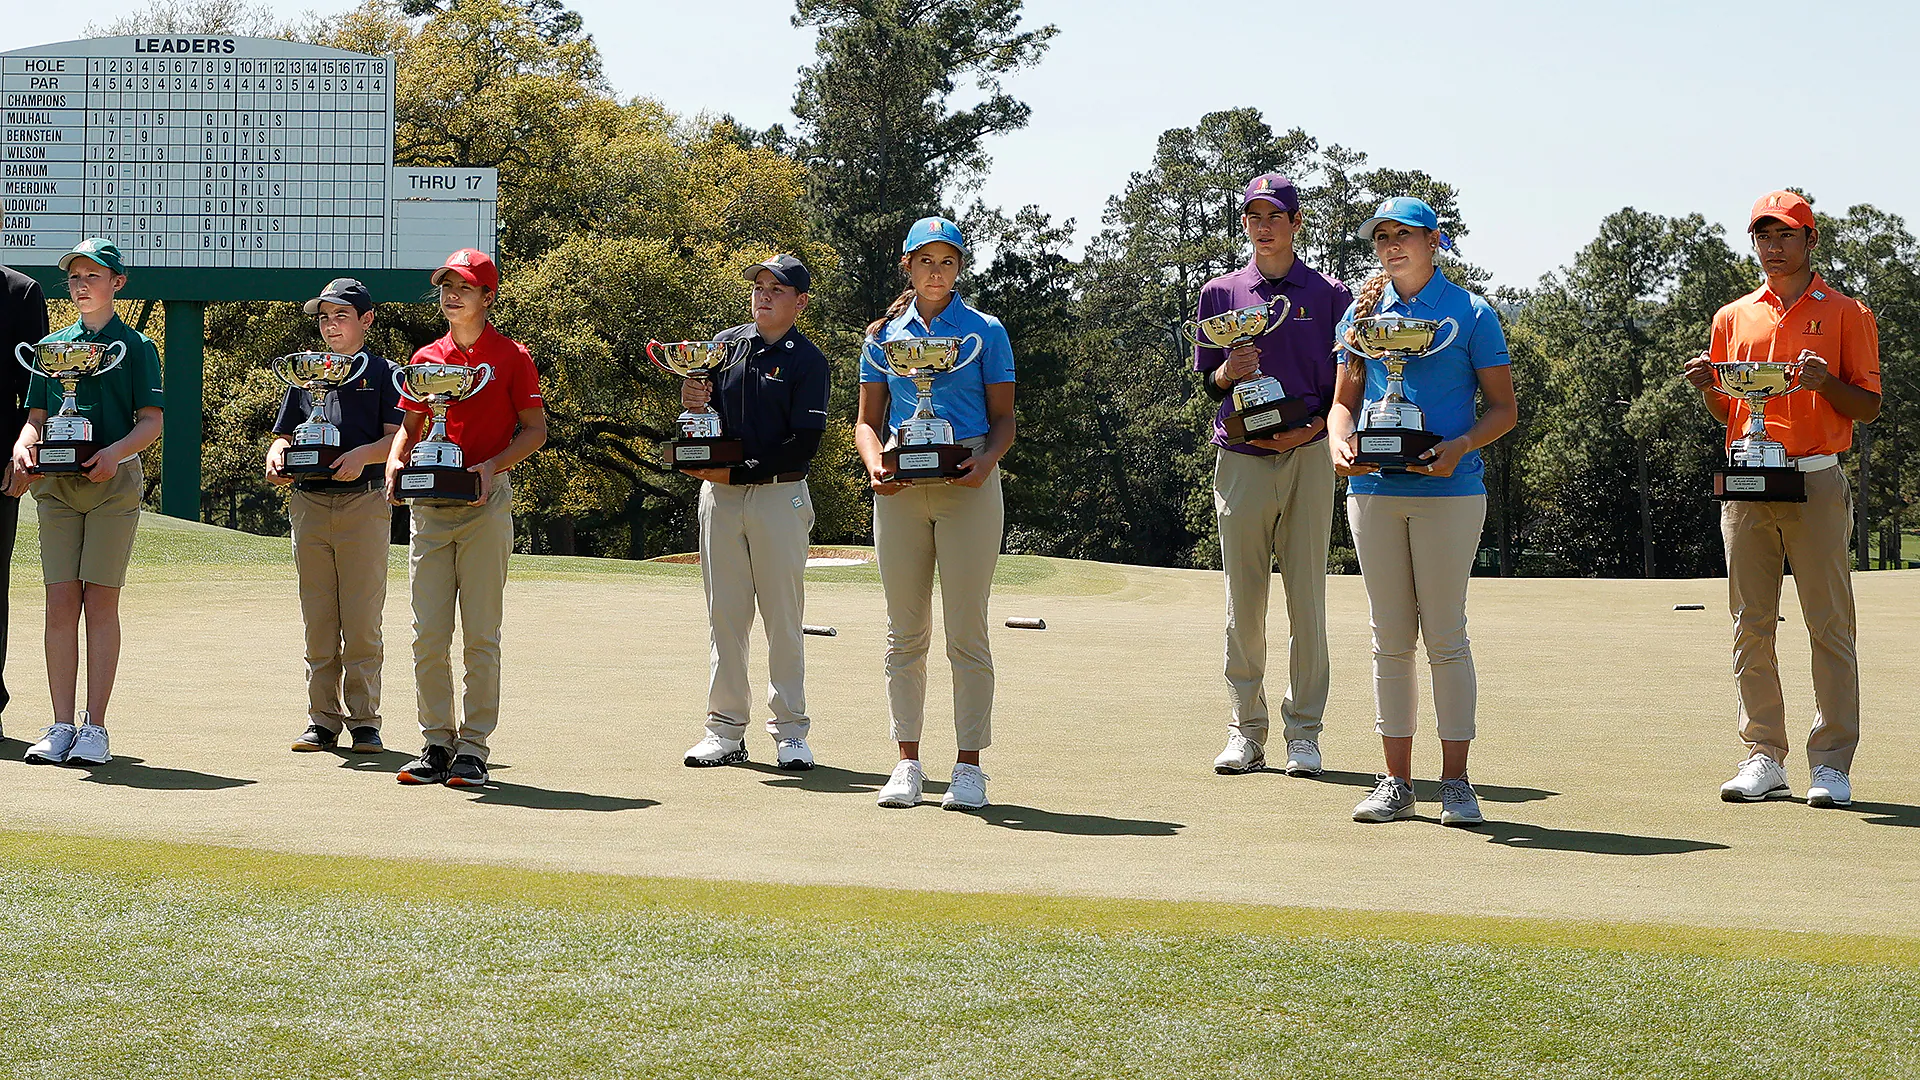 Eighty players determined for Drive, Chip and Putt National Finals at Augusta National